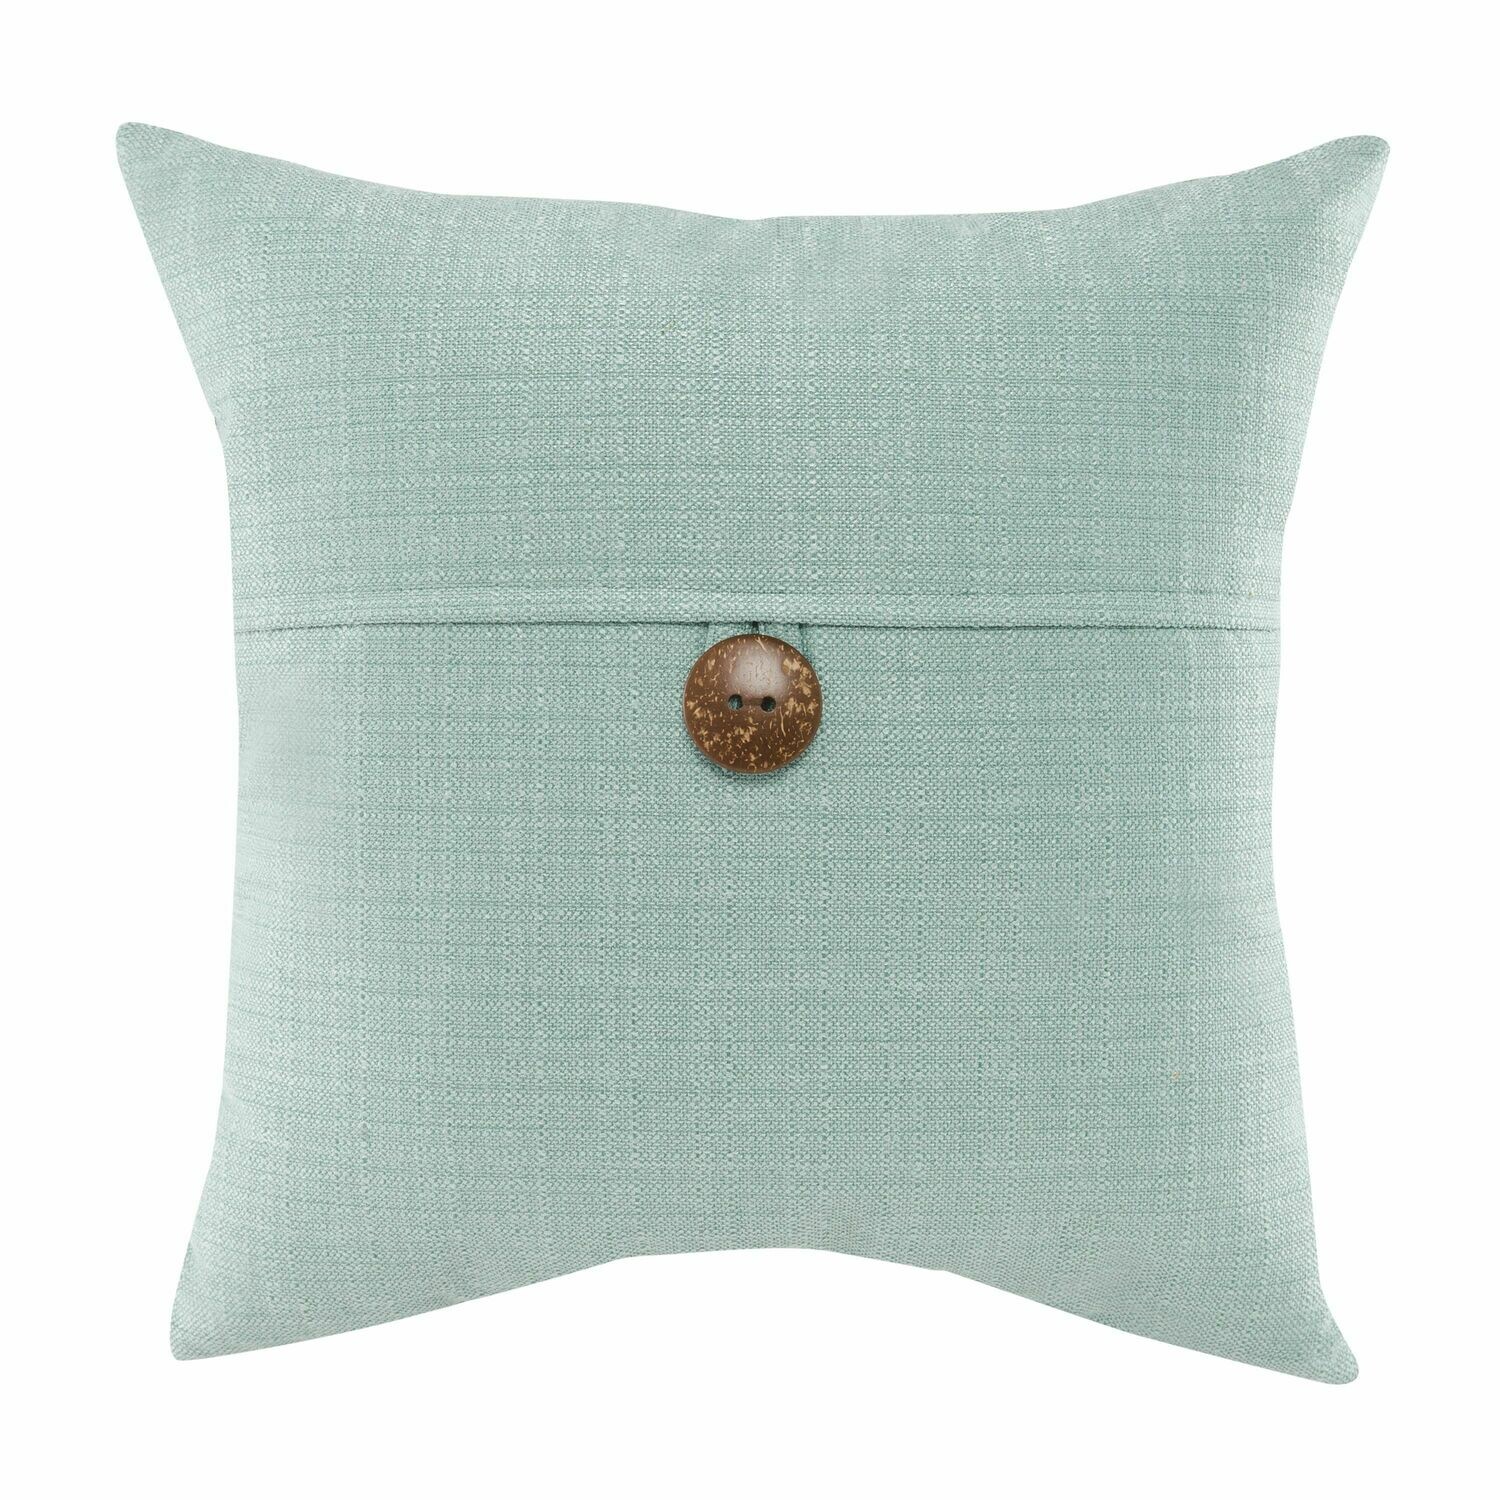 Elrene Home Fashions Button Store 18x18 Pillow